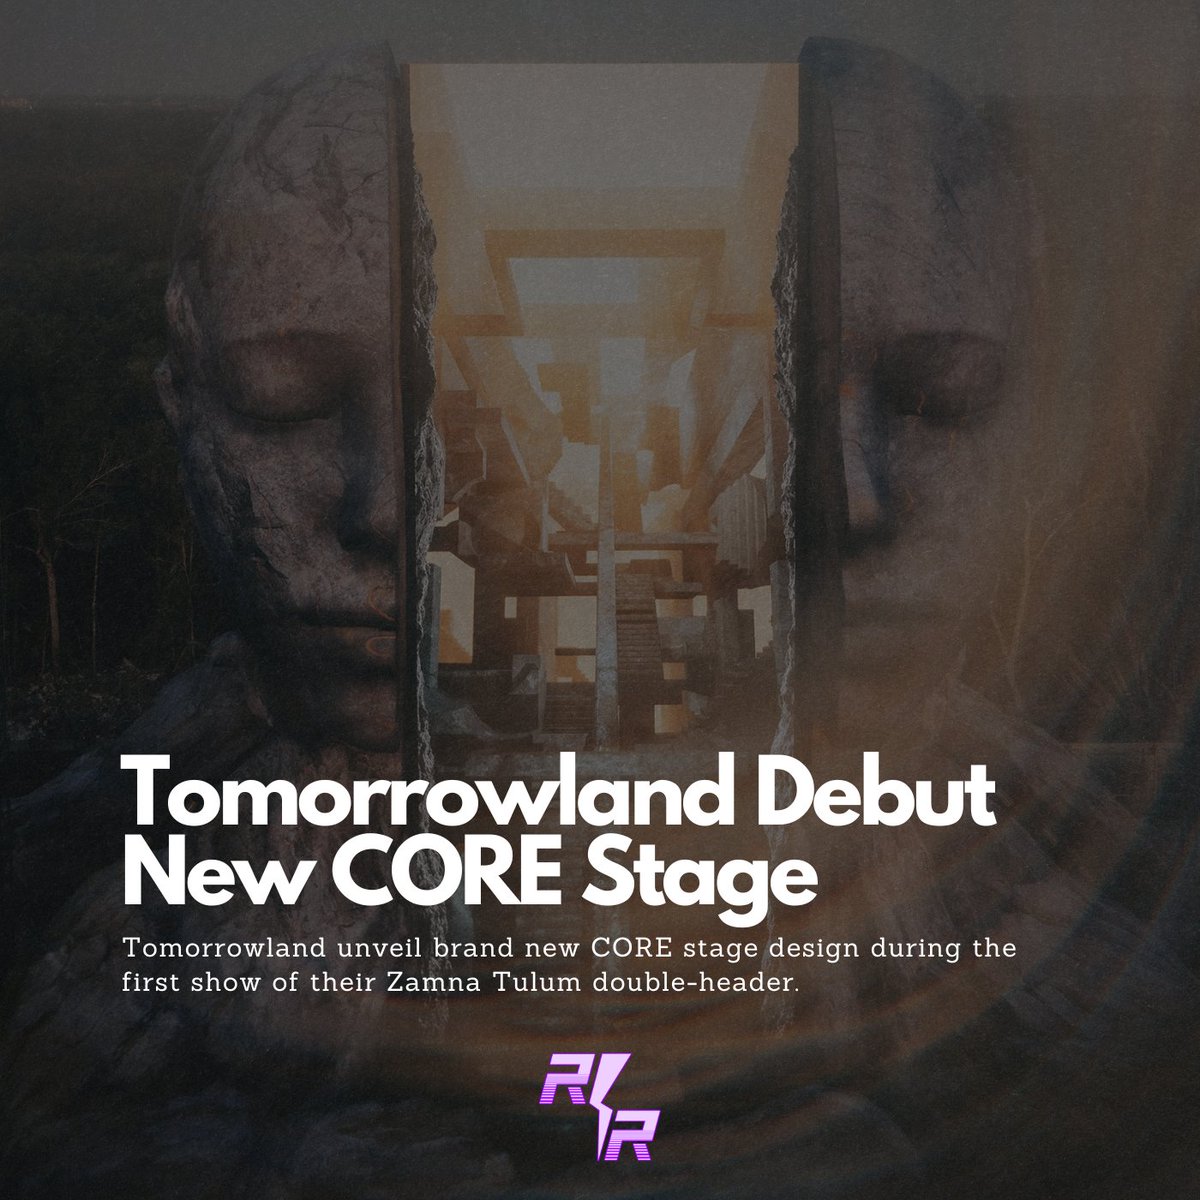 Brand new CORE stage unveiled by @tomorrowland in Tulum 🌴 raving-reviews.com/tomorrowland-d…